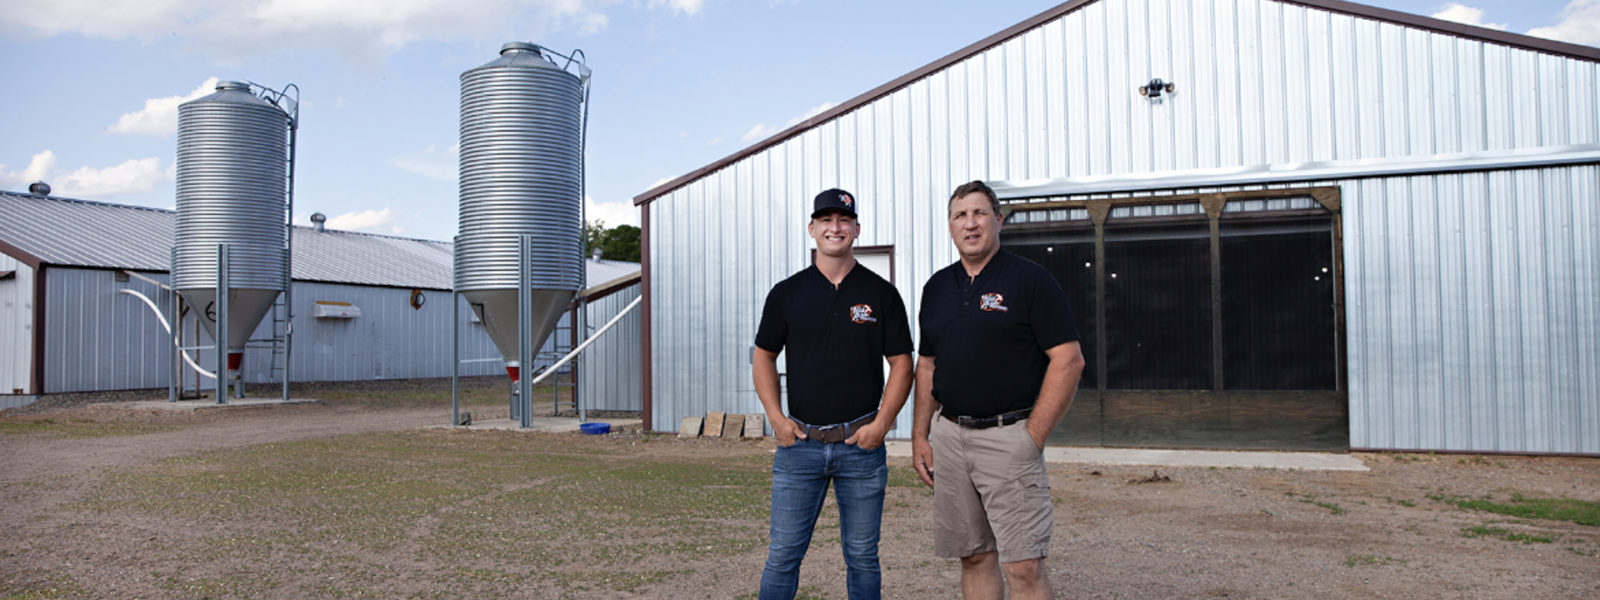 Two poultry farmers wearing black shirts and black hats are standing in front of large silver buildings and equipment on their farm.